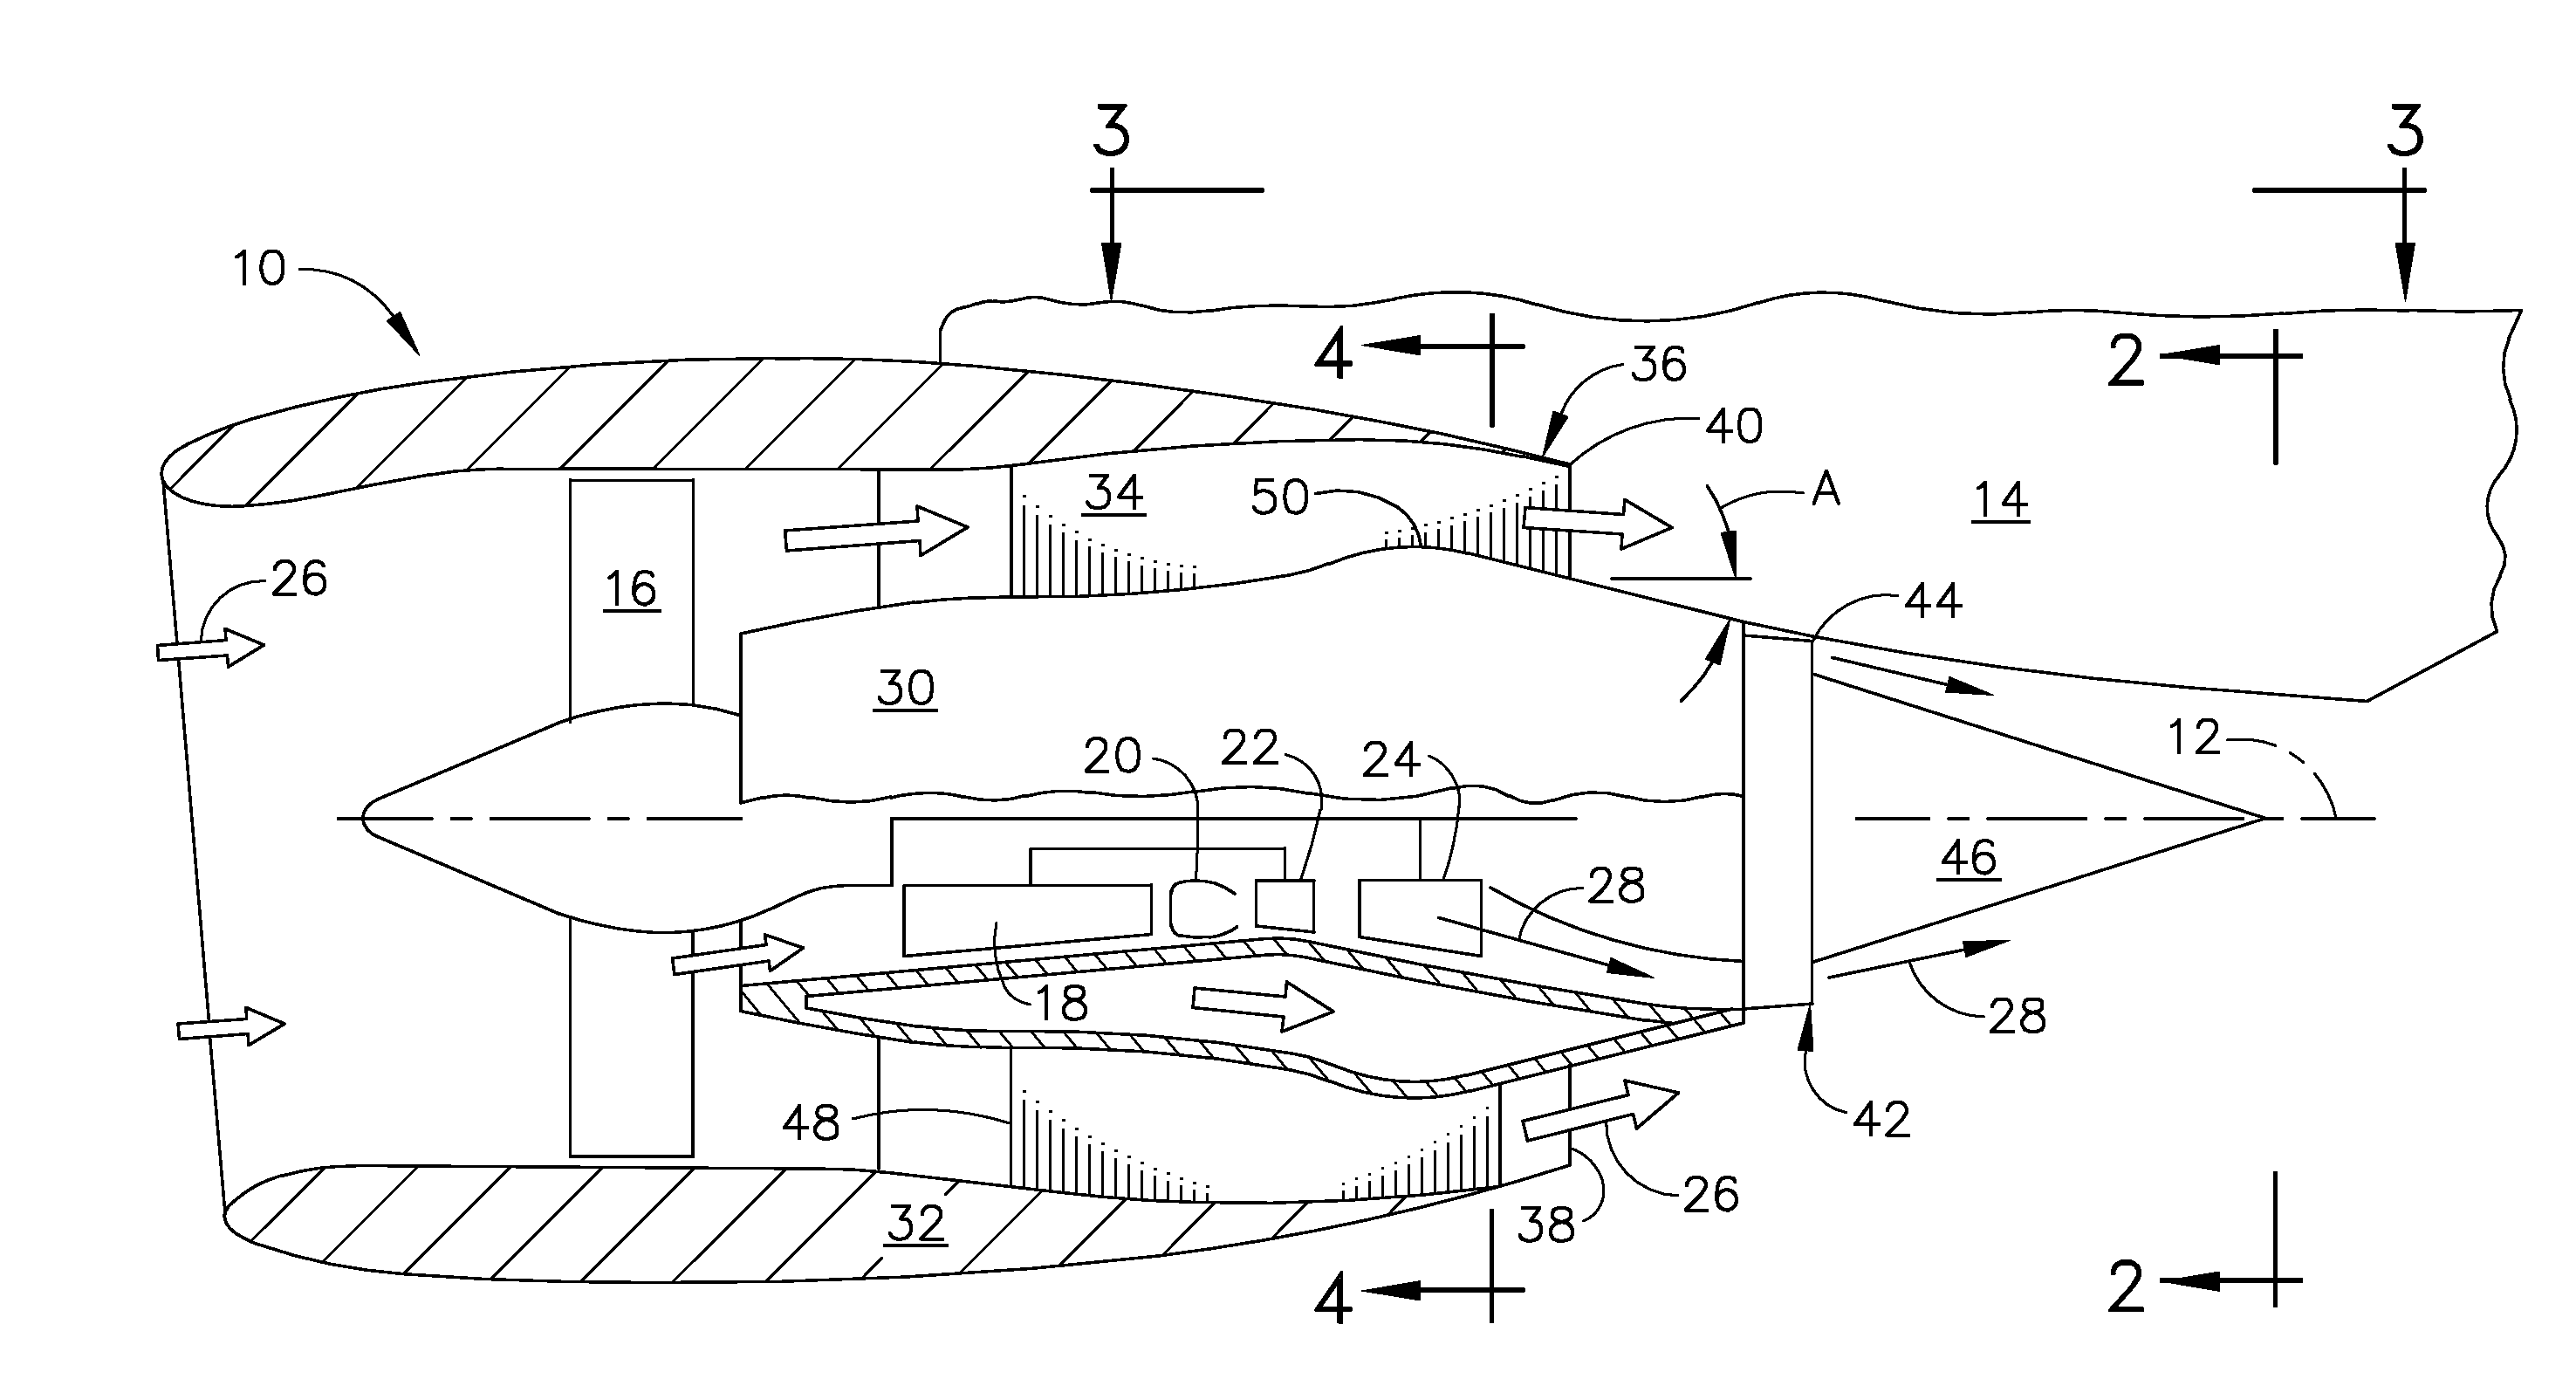 Variable Slope Exhaust Nozzle